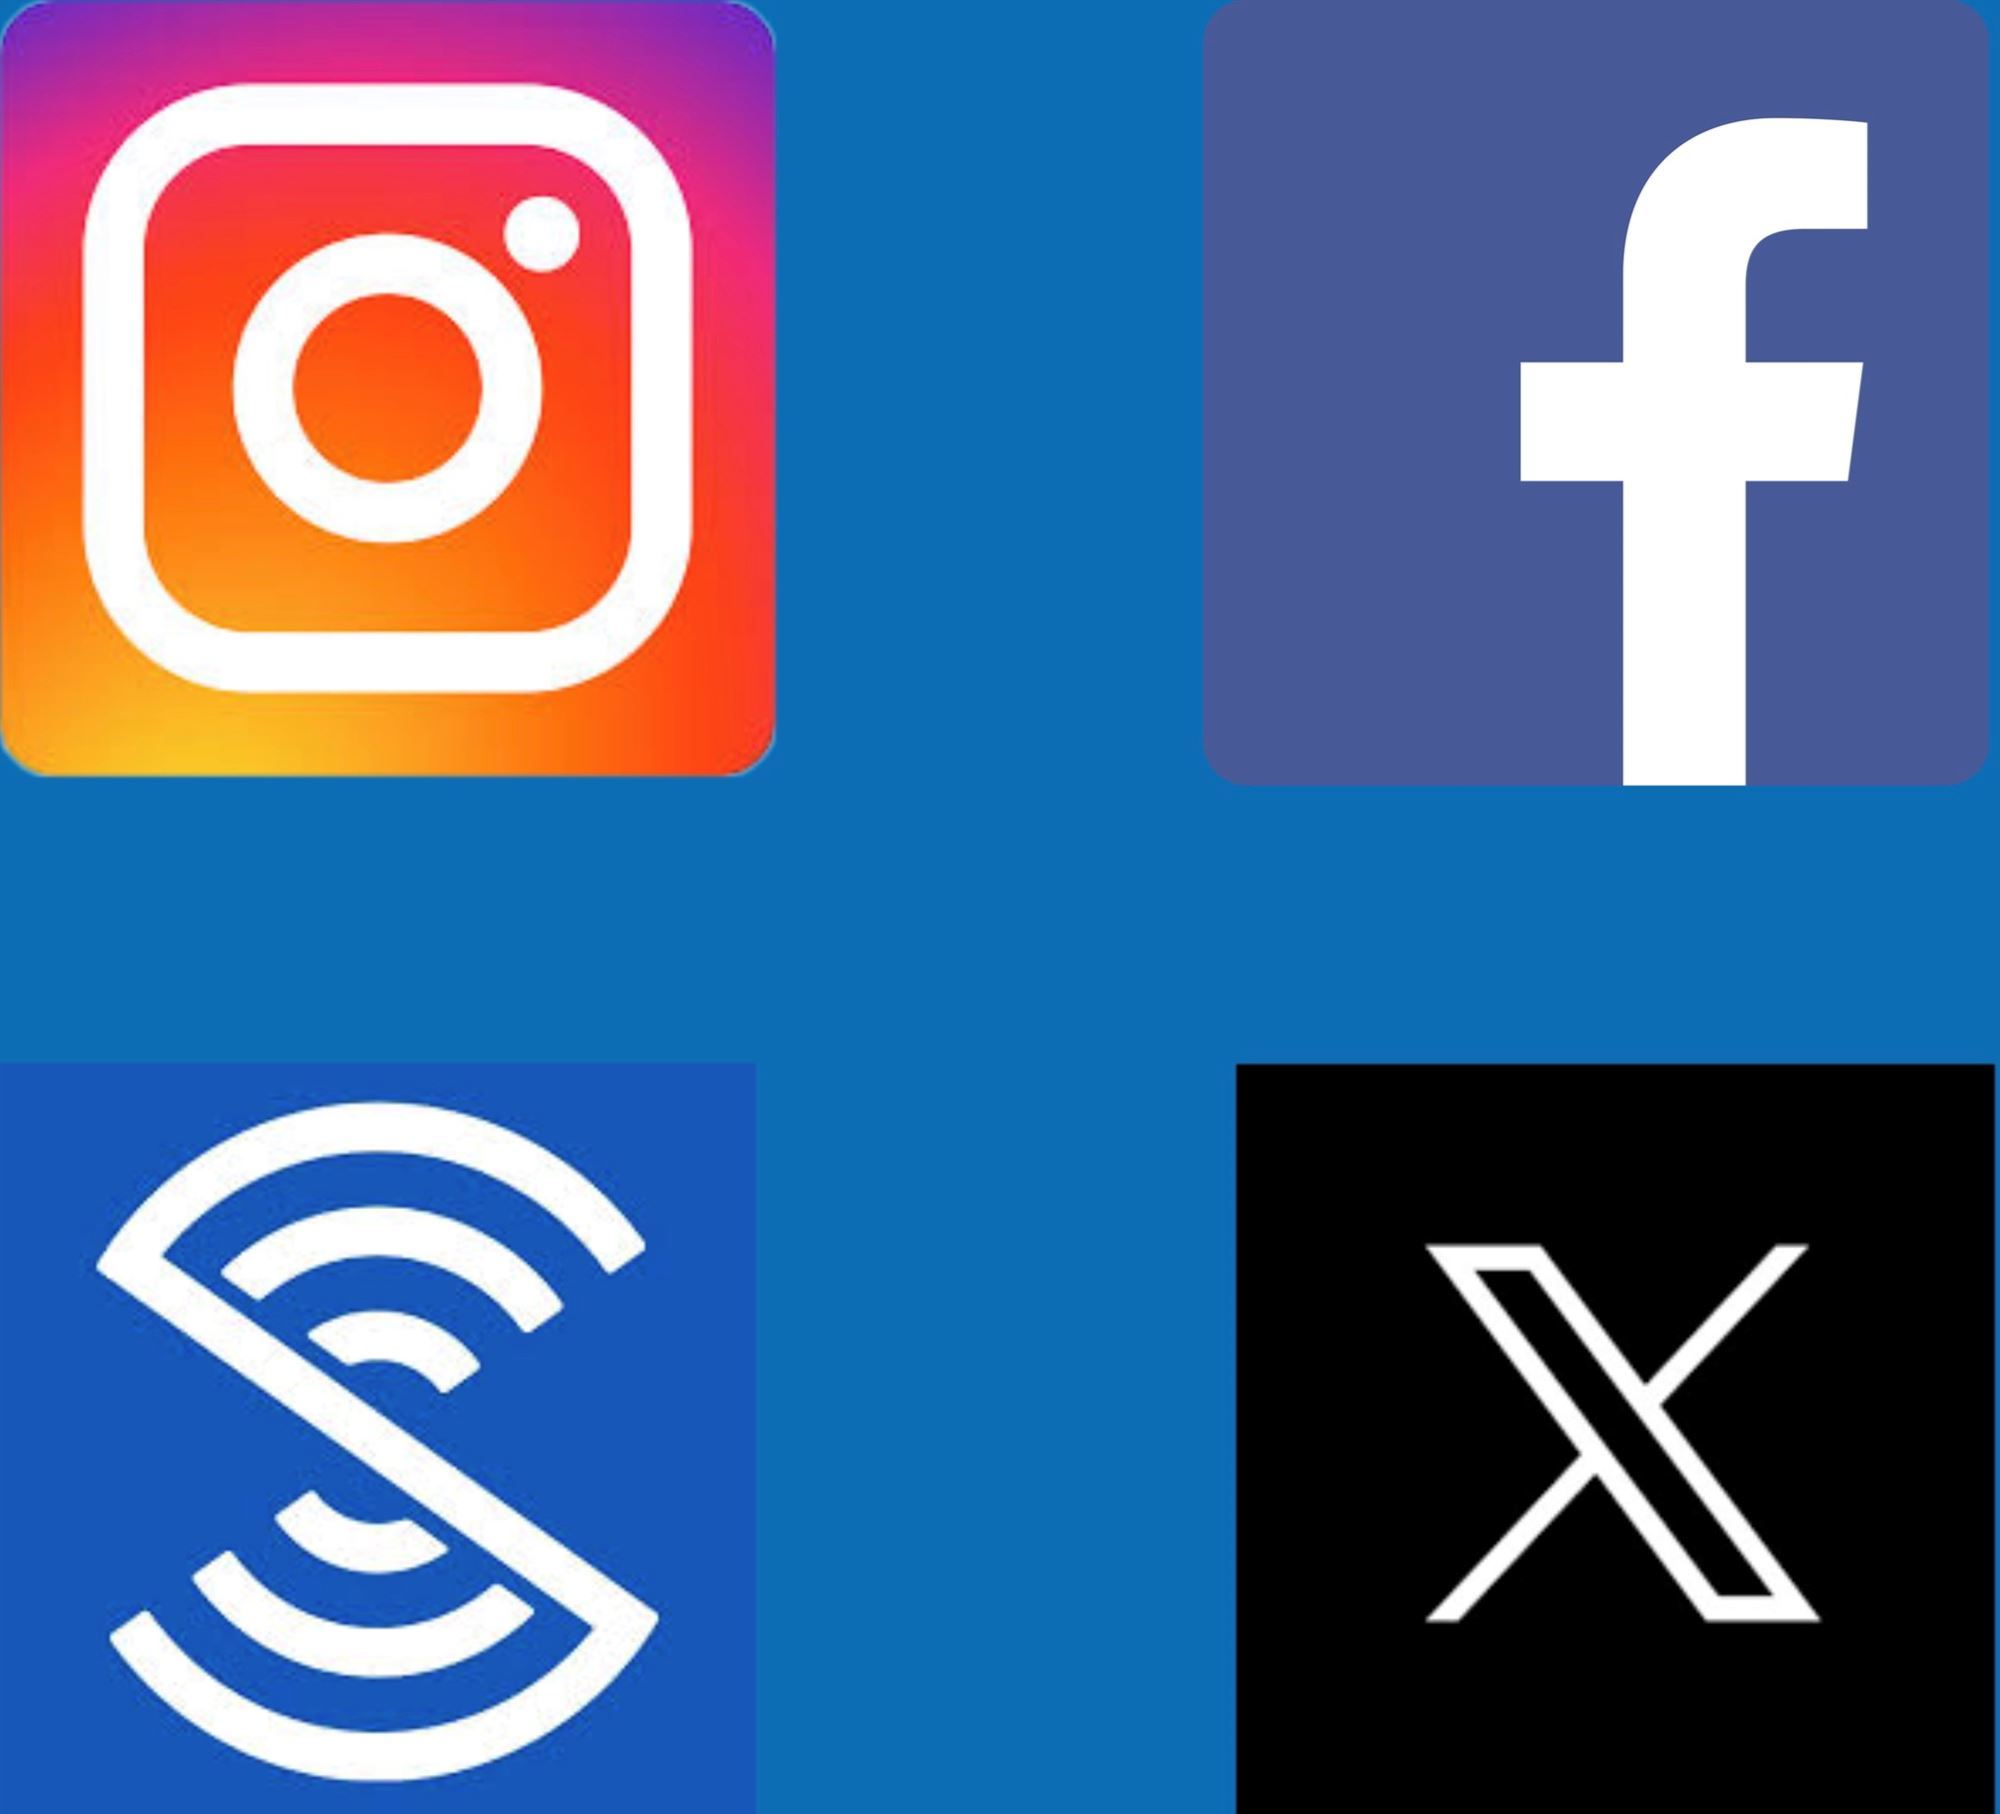 Solical media logos for Instagram, Facebook, X and Saferwatch.